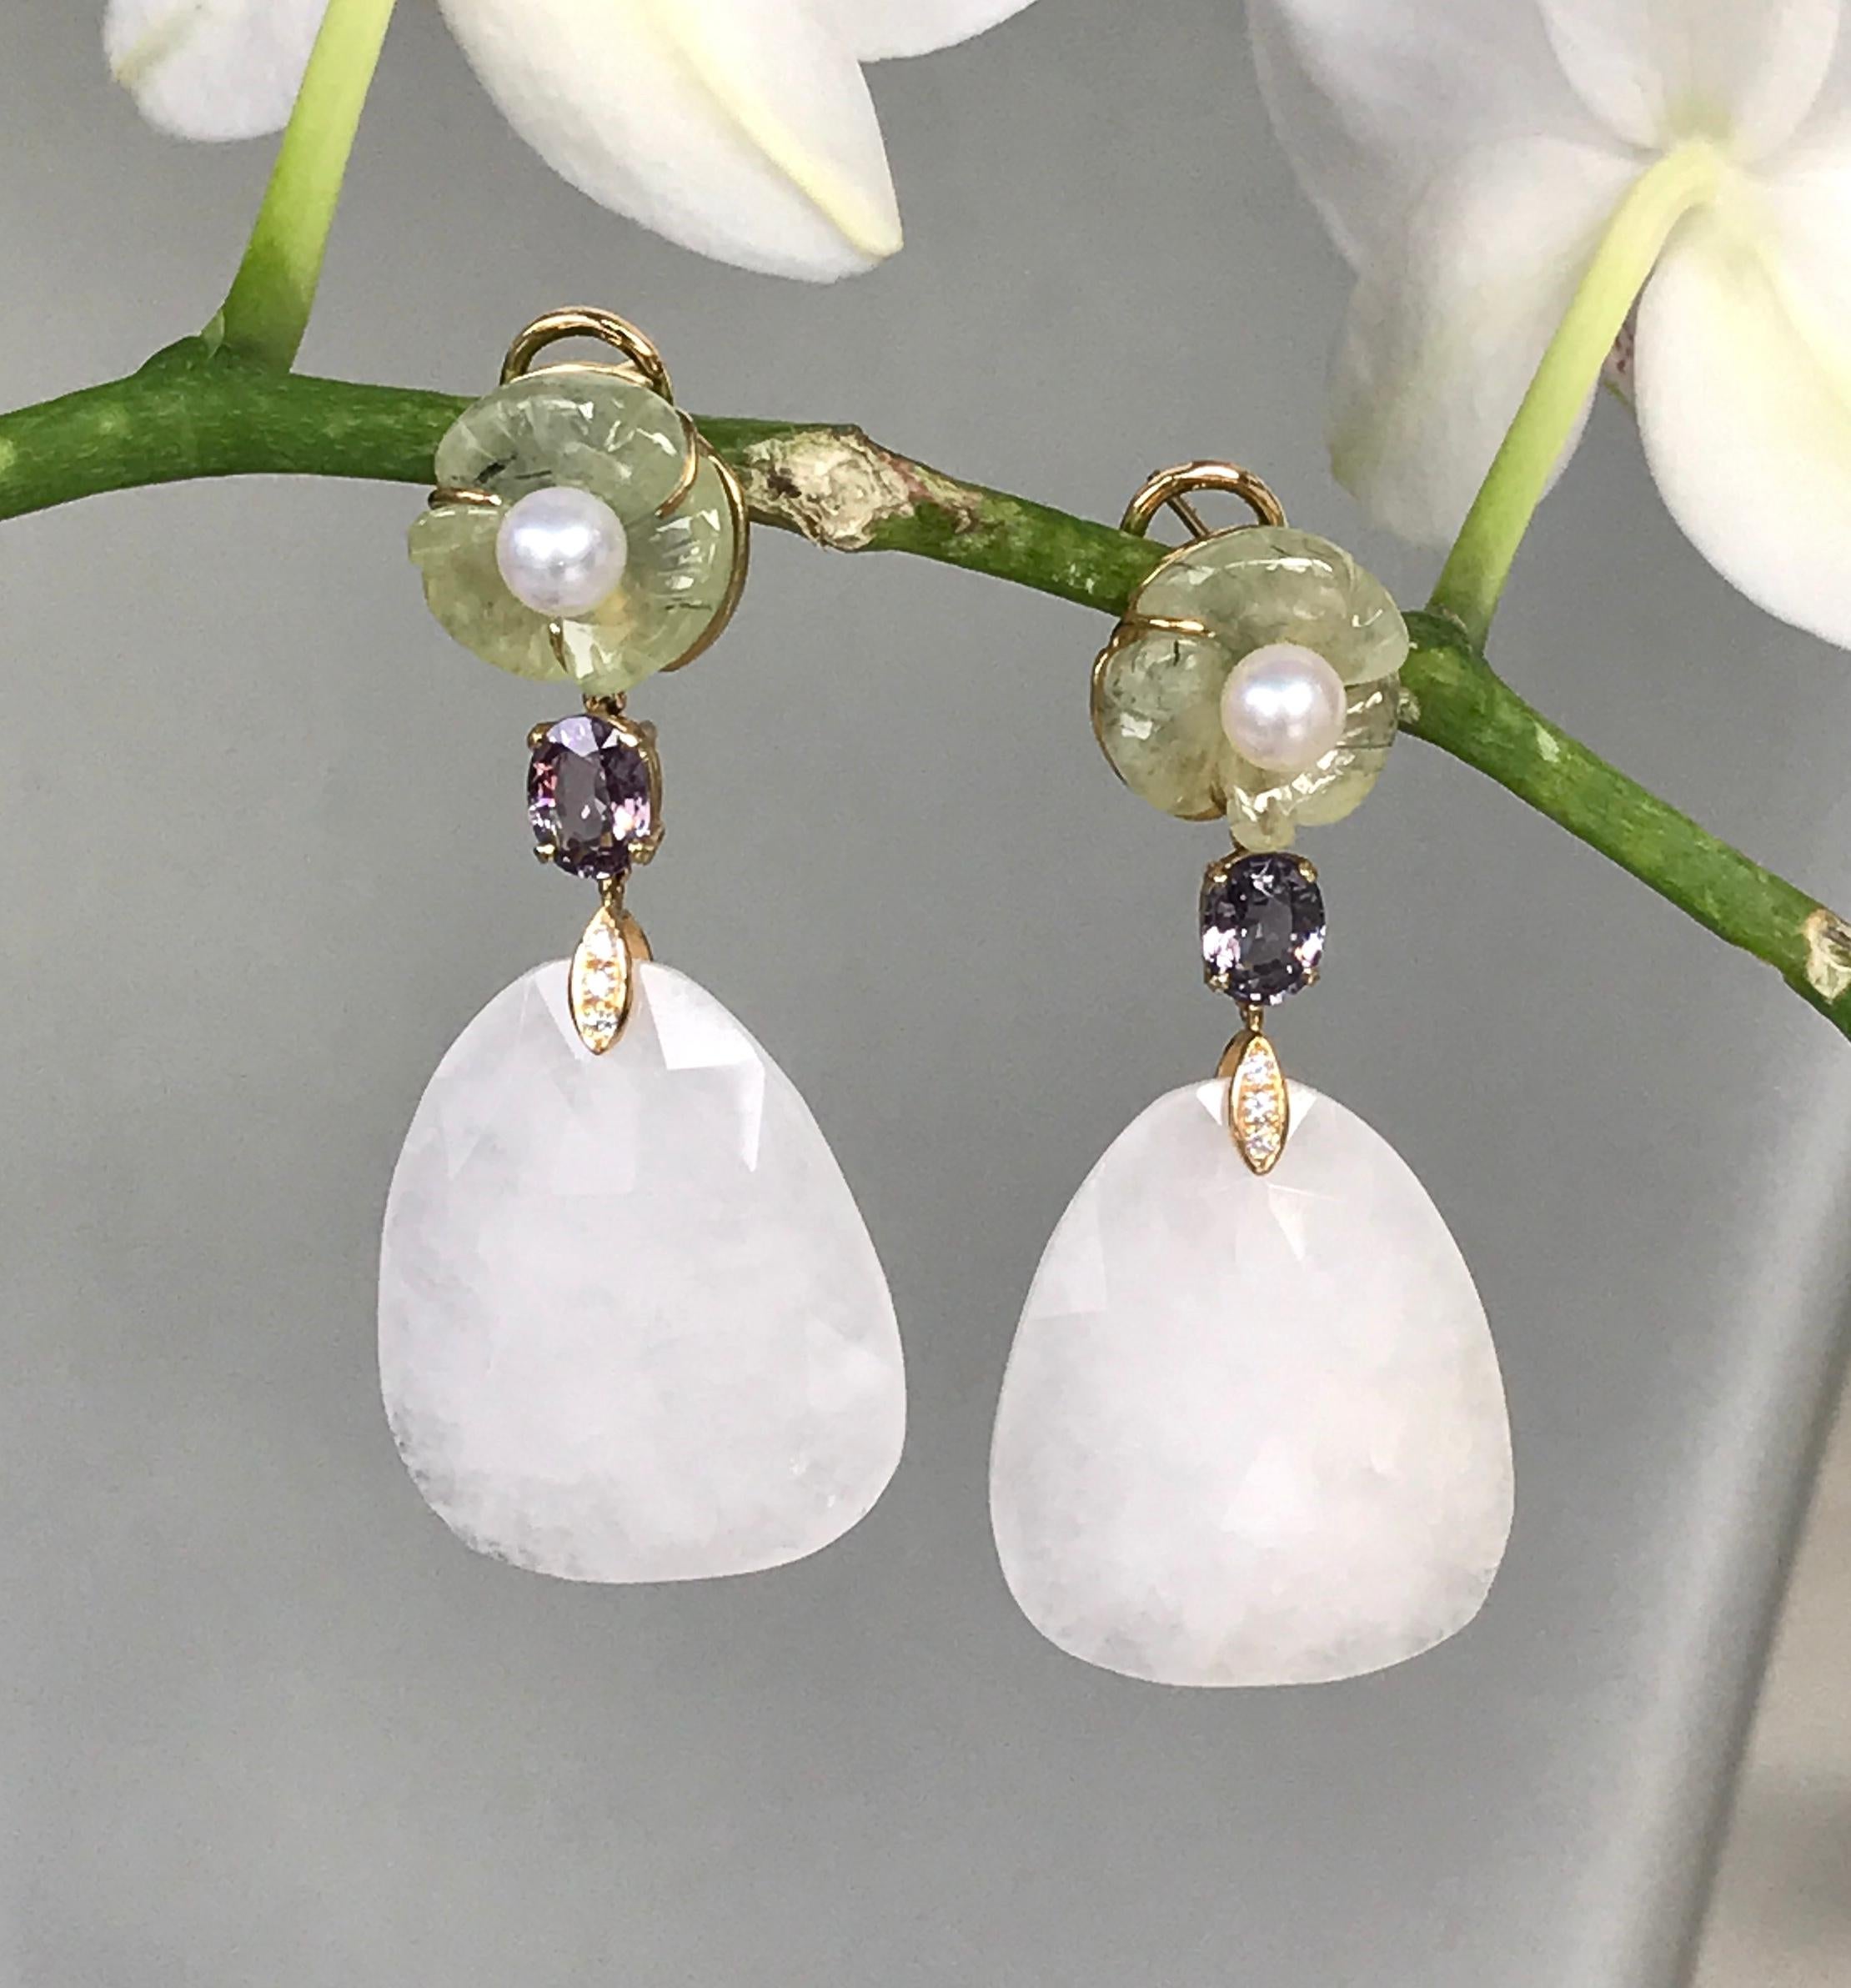 One-of-a-kind dangle earrings with carved prehnite flowers and an Akoya pearl center, with faceted spinels, diamonds, and rose-cut white agate drops, handcrafted in 18 karat yellow gold. 2.25 inches or 57 mm length.

Be in full bloom with these